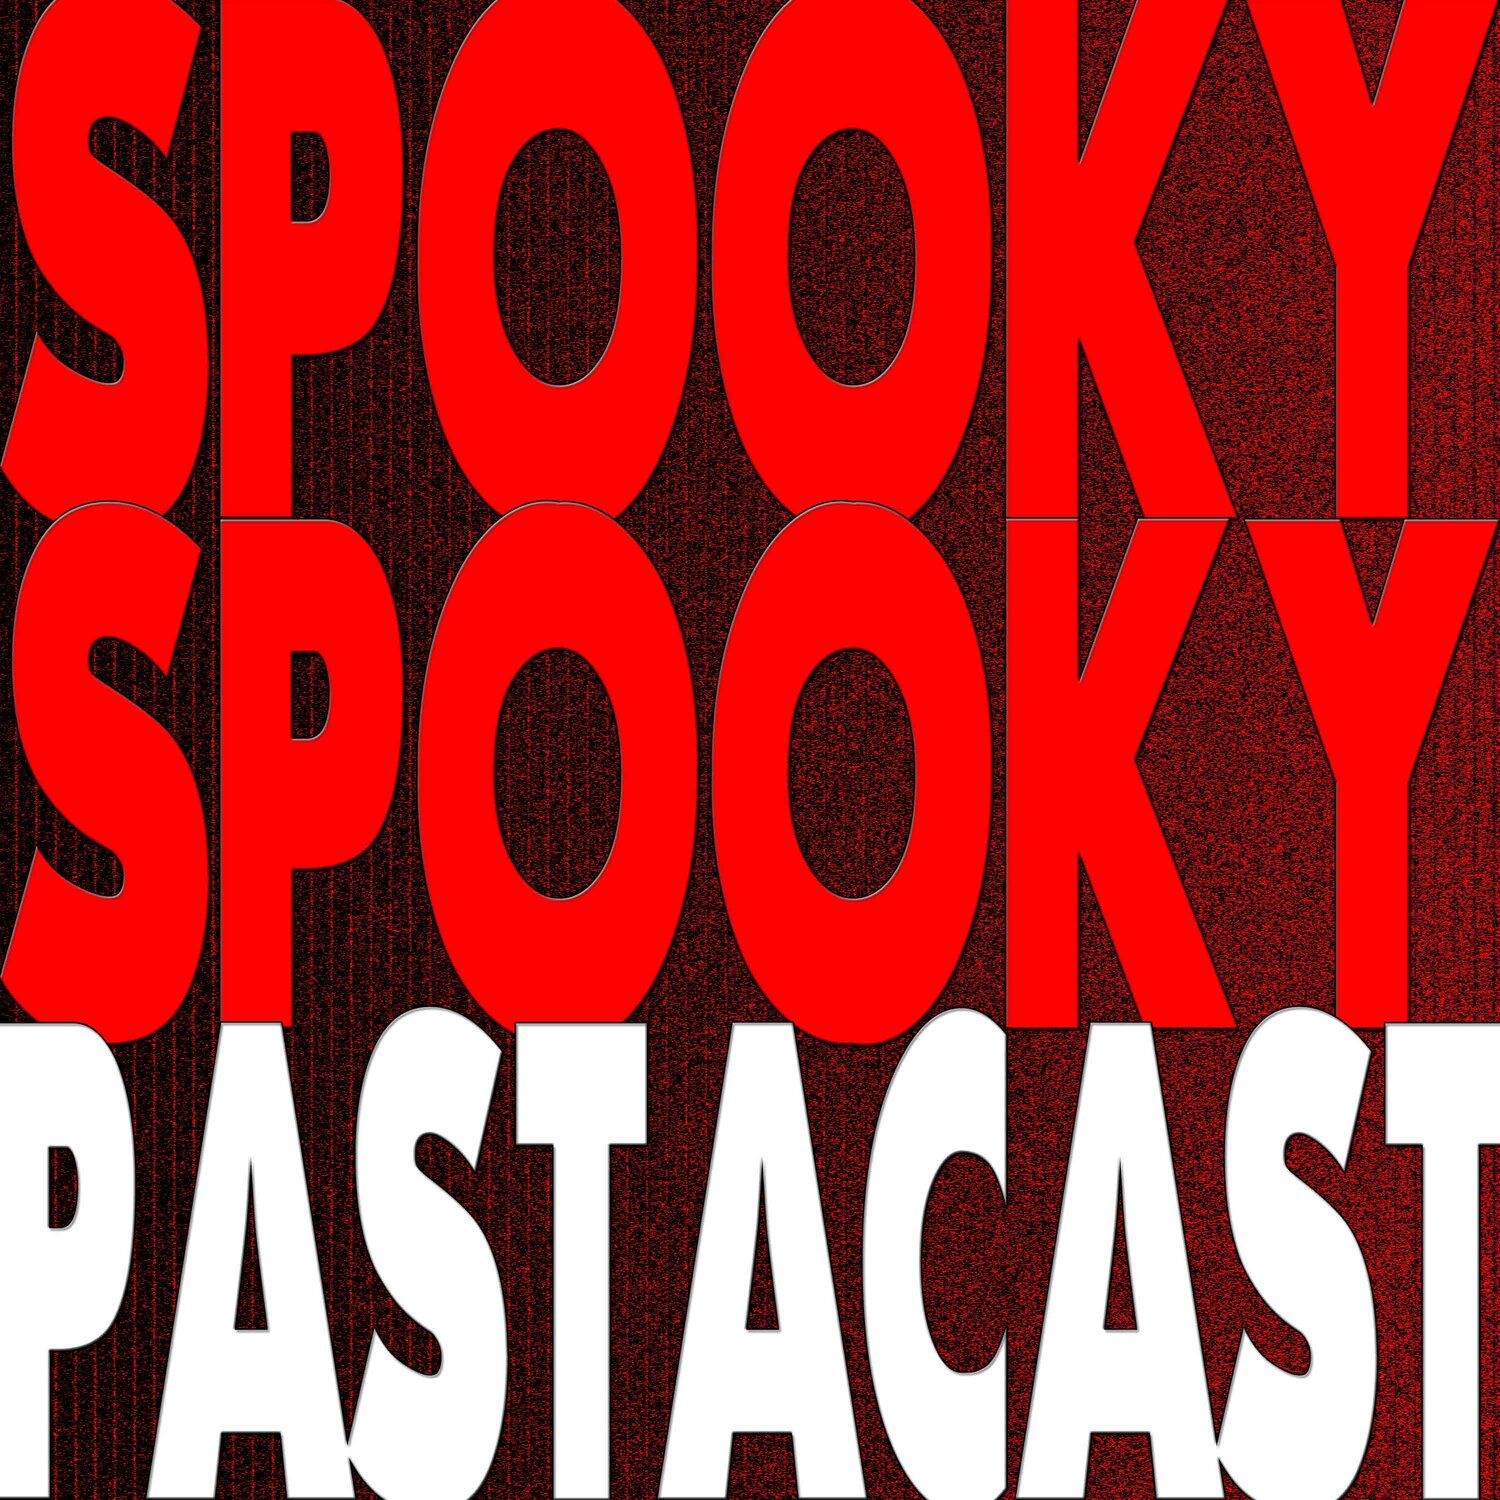 53: Spooky Spooky Podcast - 1 - The Poo-Ghost Part 1